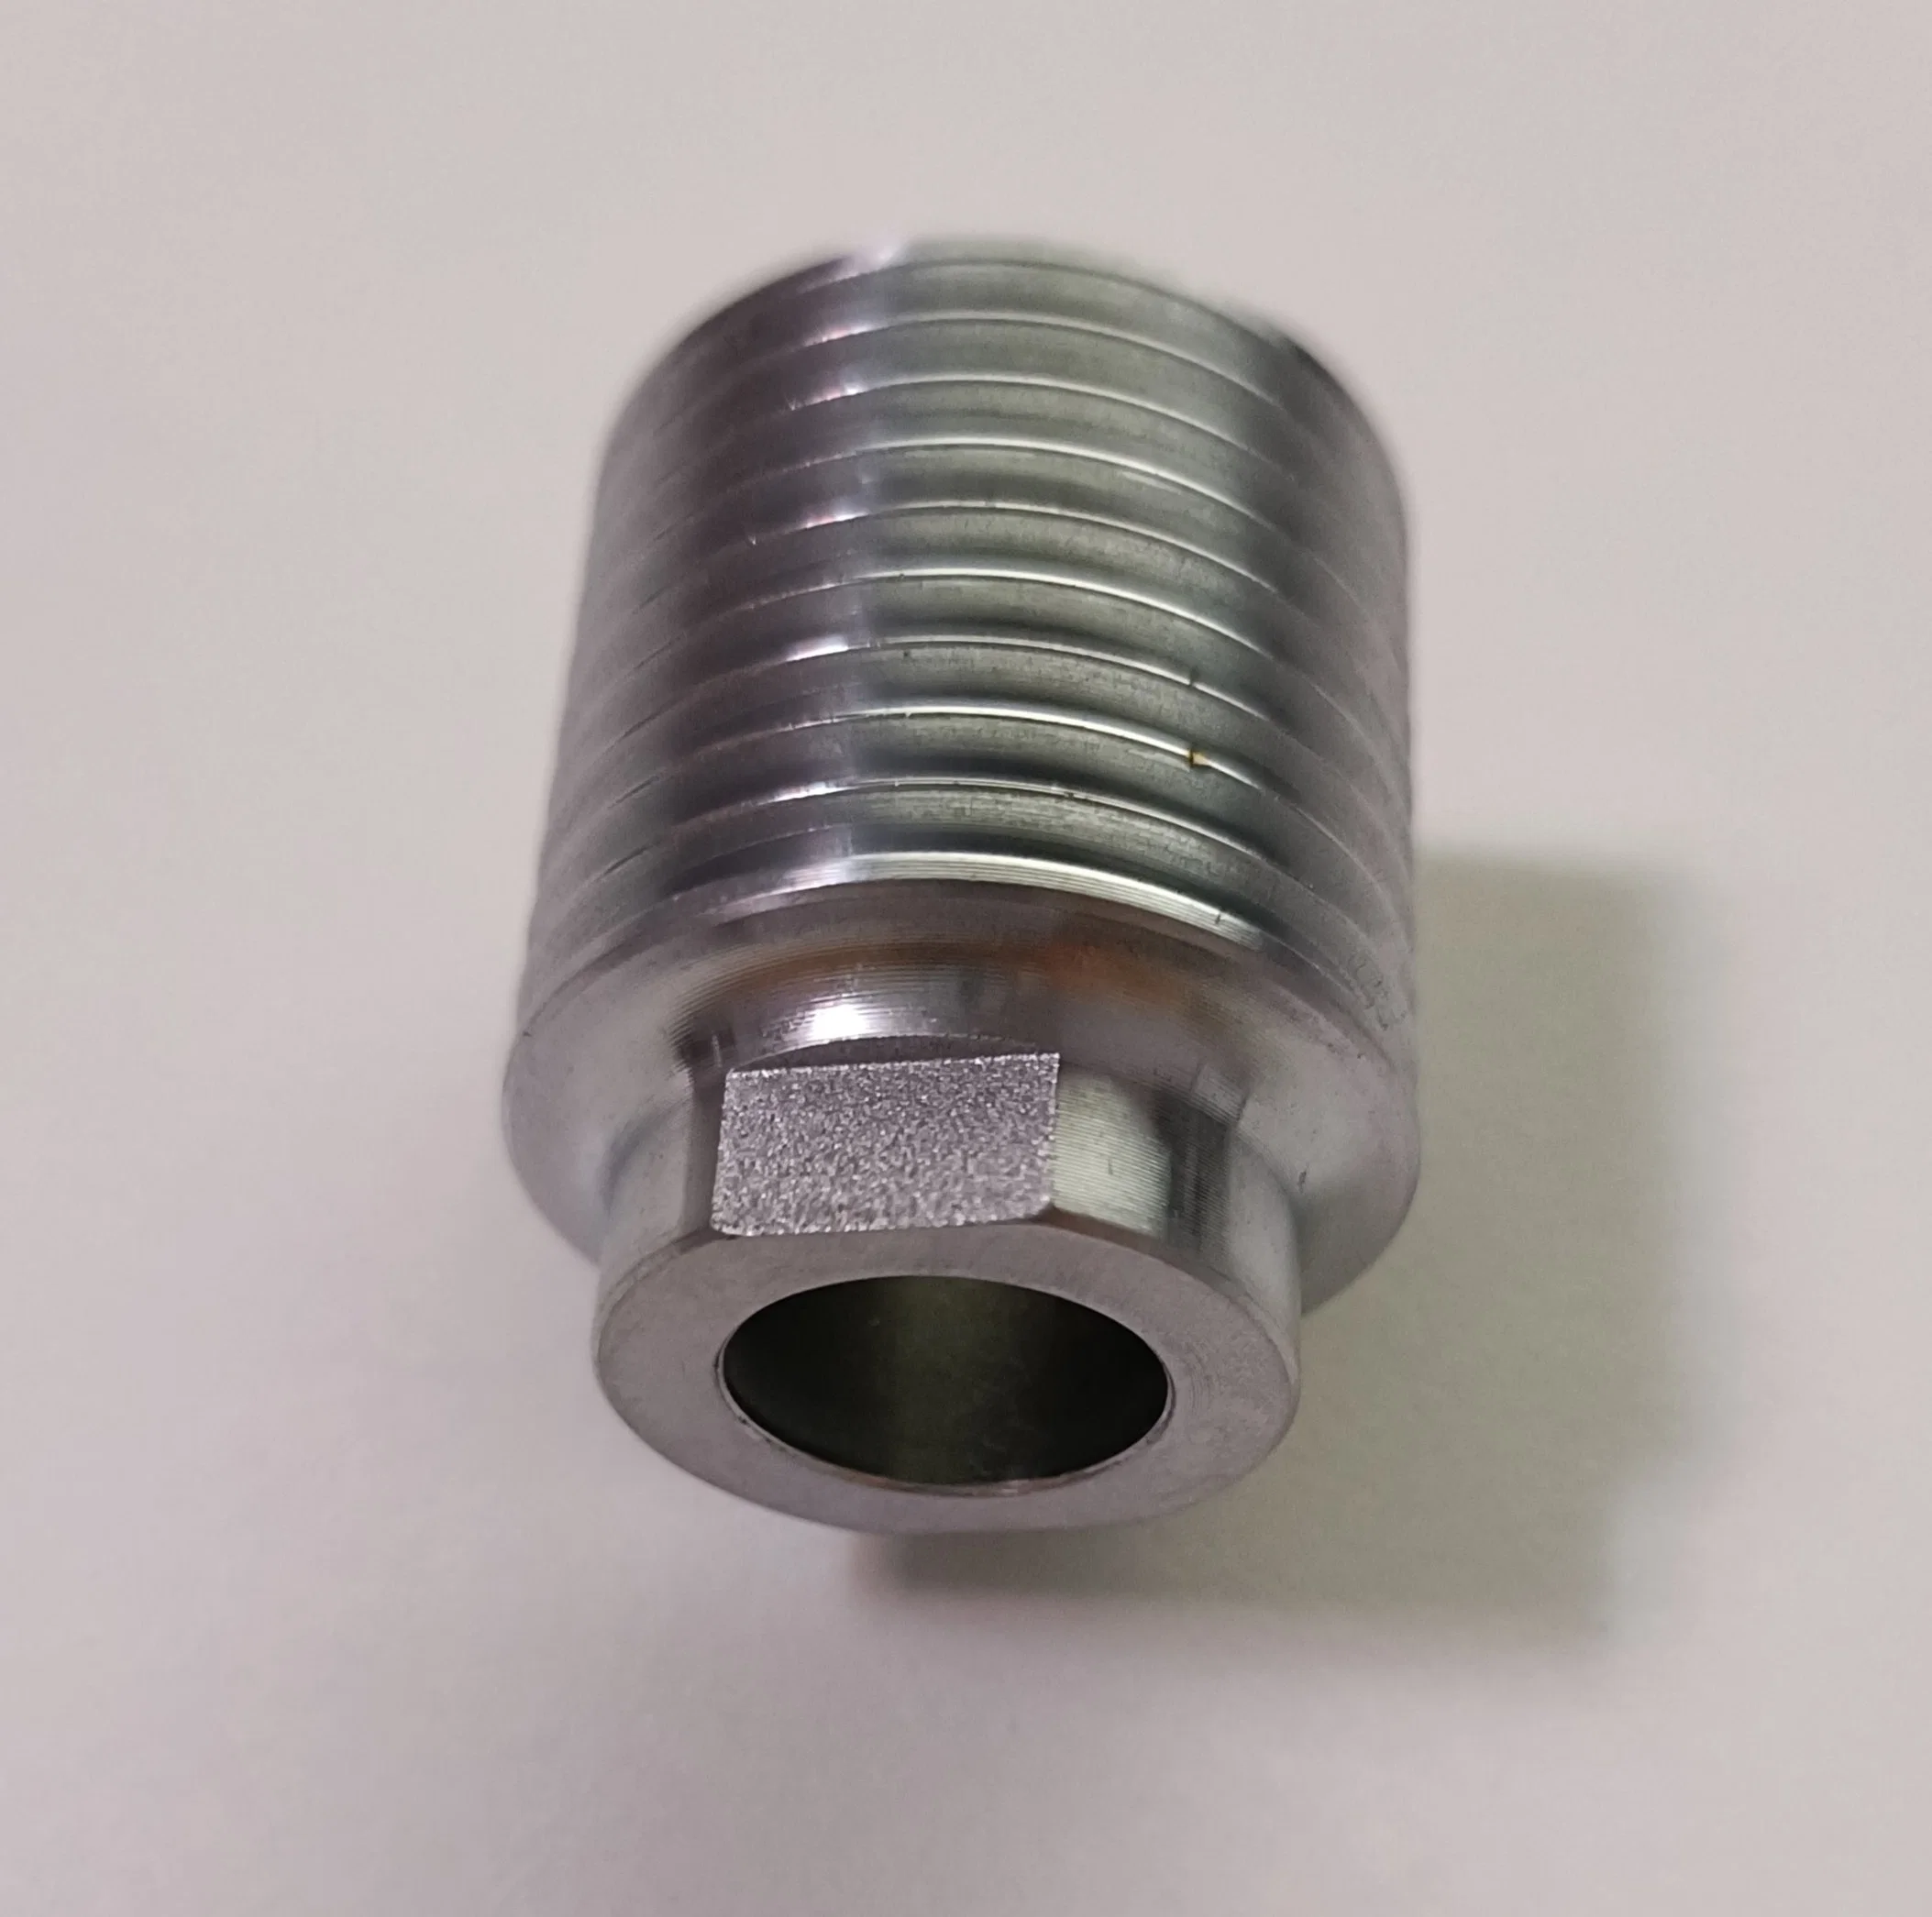 Sgj Customized High Precision Machined Metal Parts by Stainless Steel, Aluminum, Copper, Iron, Kovar Alloy, etc.